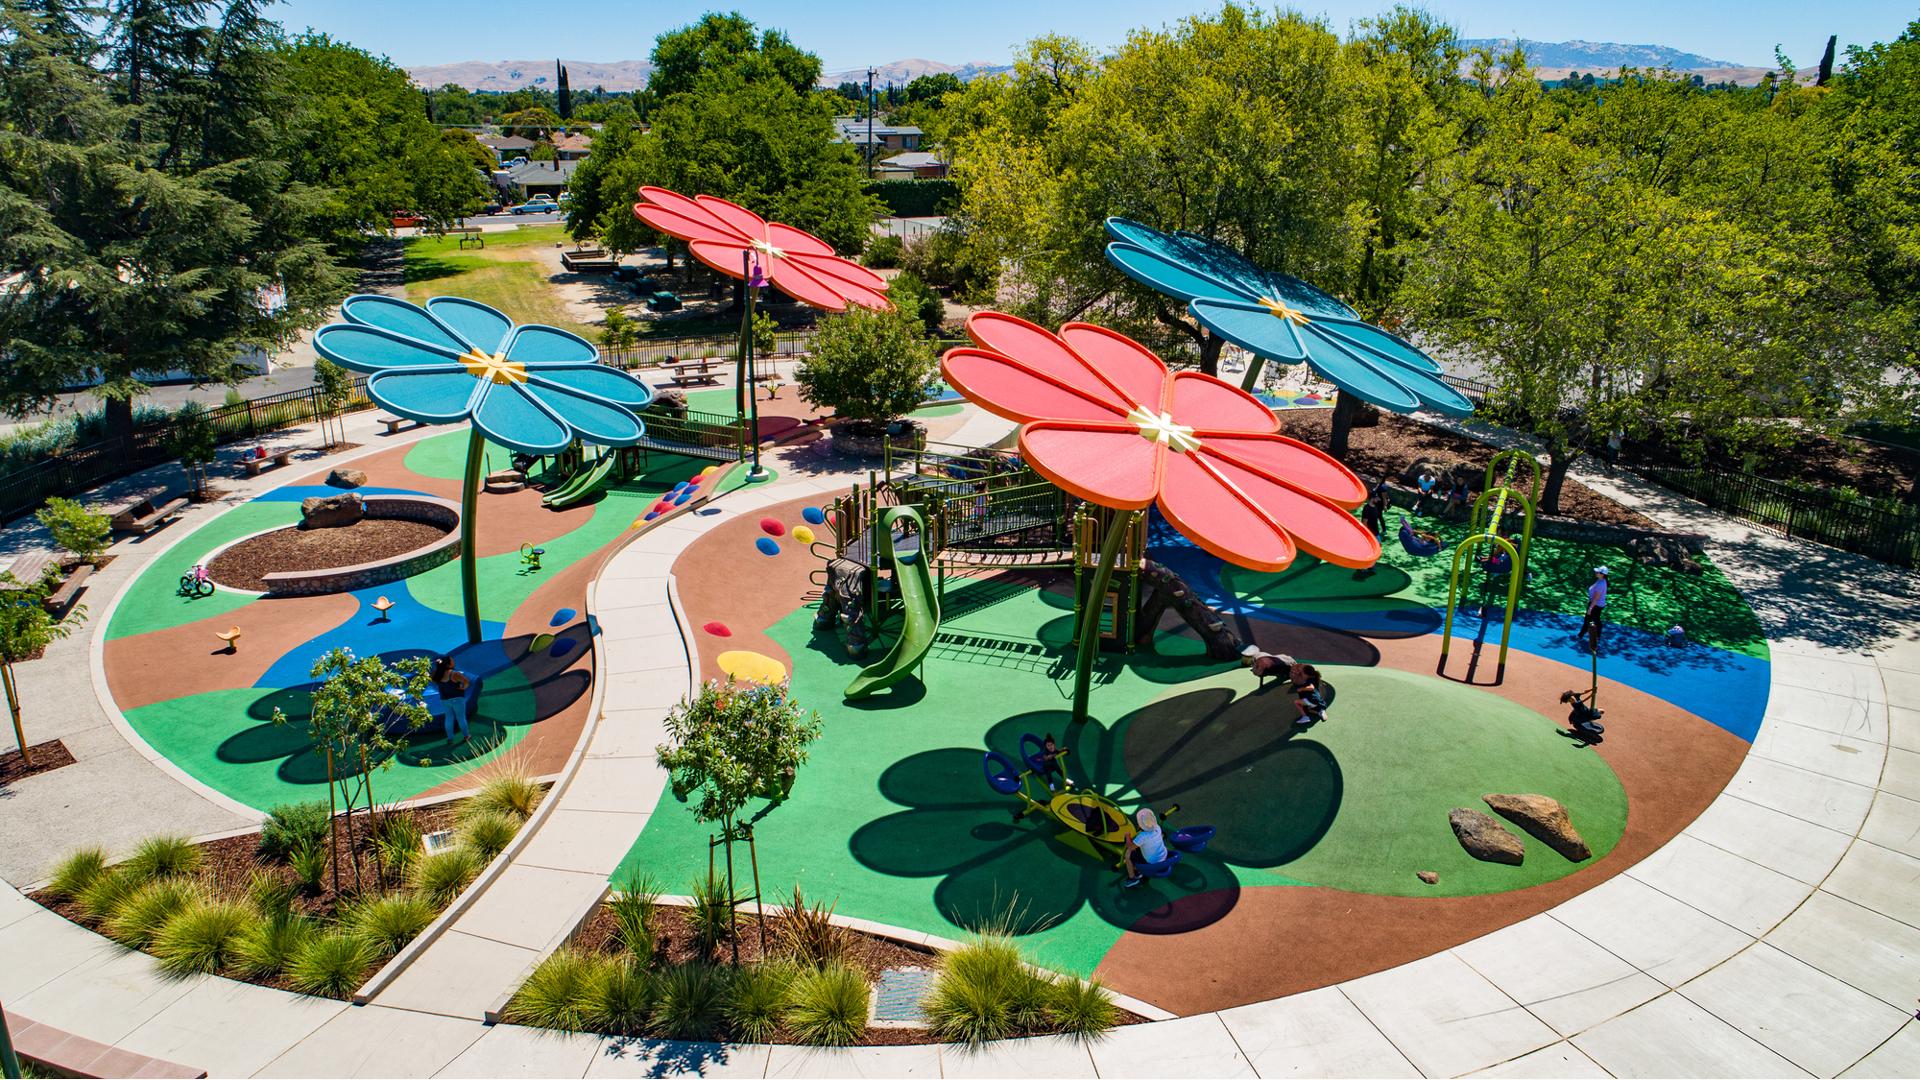 Four large red and blue shades designed like bloomed daisy flowers cover a large colorful play area with playground and other freestanding play activities for all abilities. 